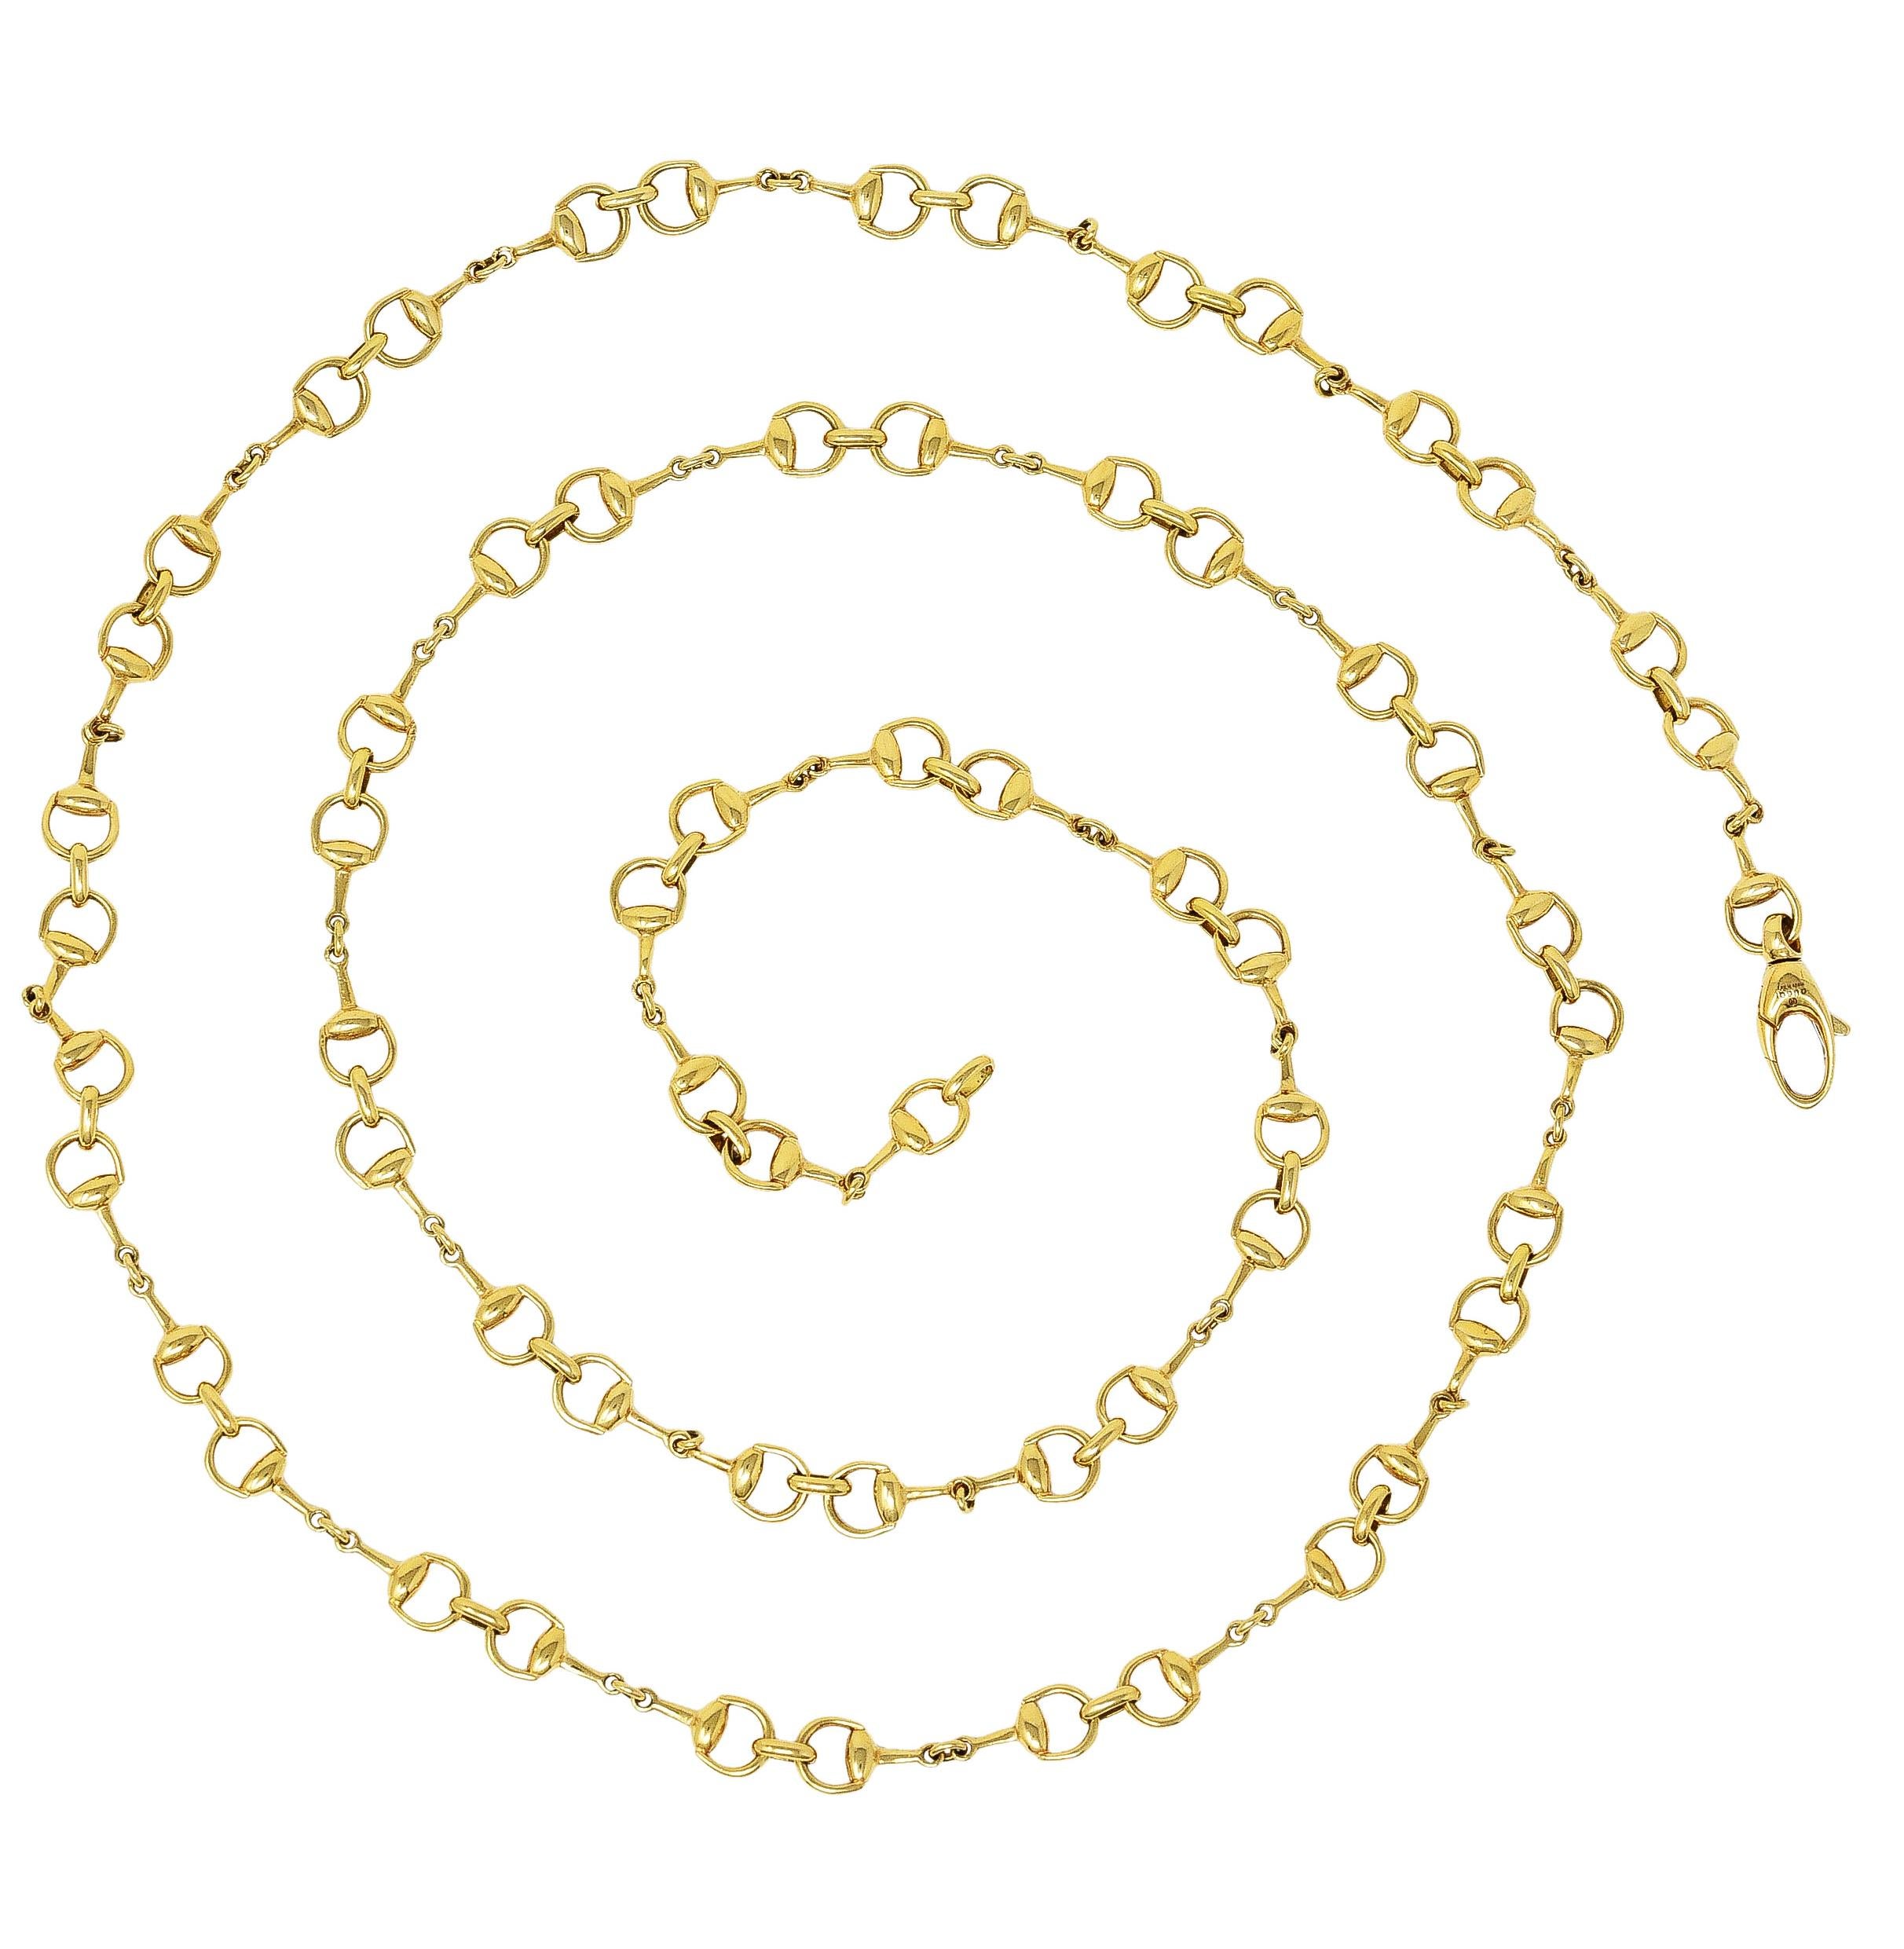 Chain necklace comprised of stylized horsebit links

Links are connected by jump rings

Accented by high polish finish

Stamped 750 for 18 karat gold

Fully signed Gucci, Made in Italy

From the contemporary Horsebit Collection

Width: 1/4